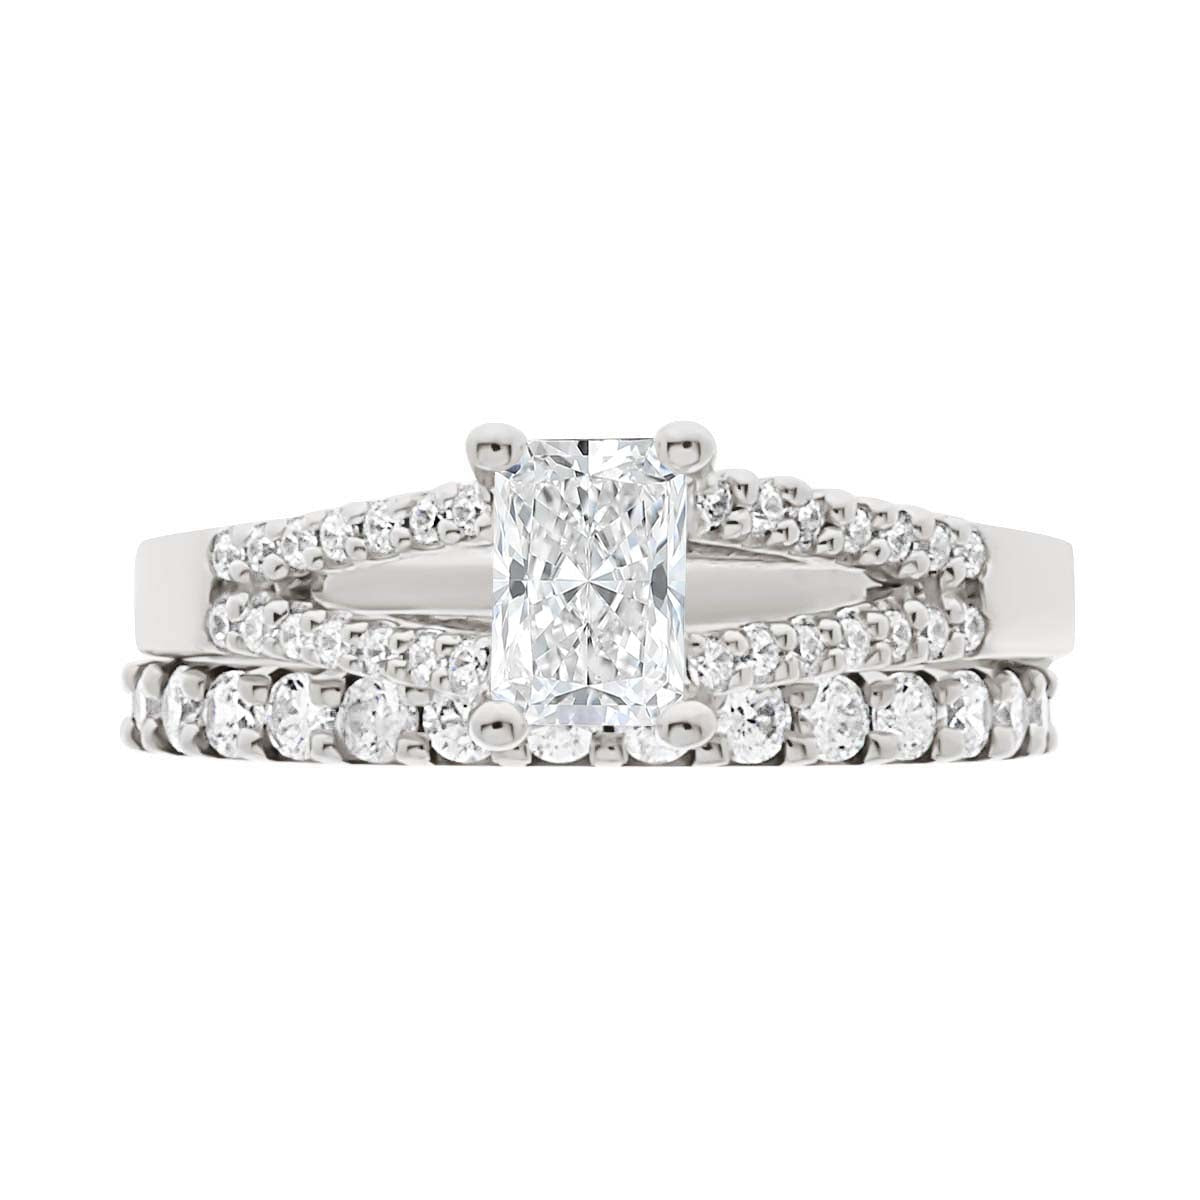 Radiant Cut Diamond Ring in white gold with a matching diamond wedding ring